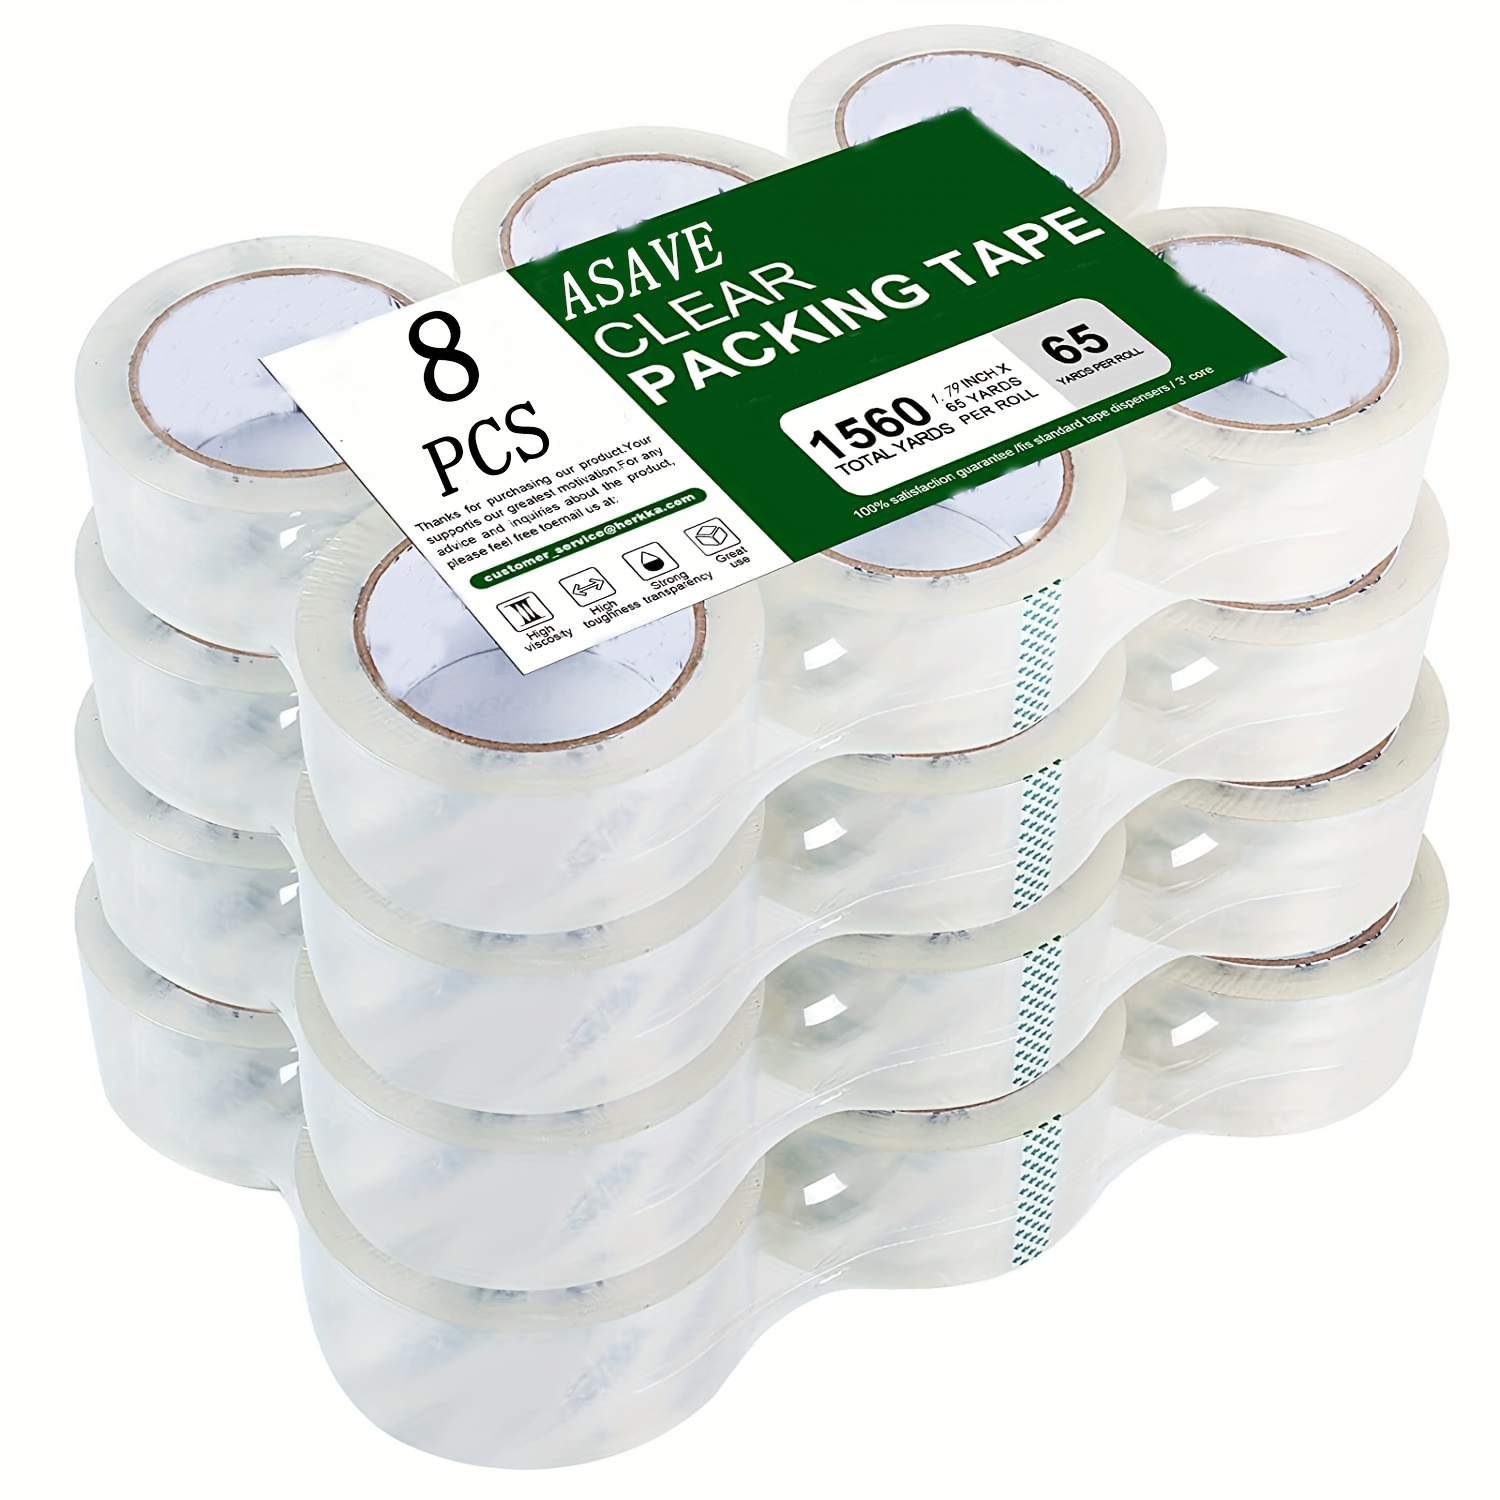 

Economy Pack, Clear Packing Tape, 8 Rolls Heavy Duty Packaging Tape For Shipping Packaging Moving Sealing, Thicker Clear Packing Tape, 65 Yards Per Roll, 520 Total Yards.